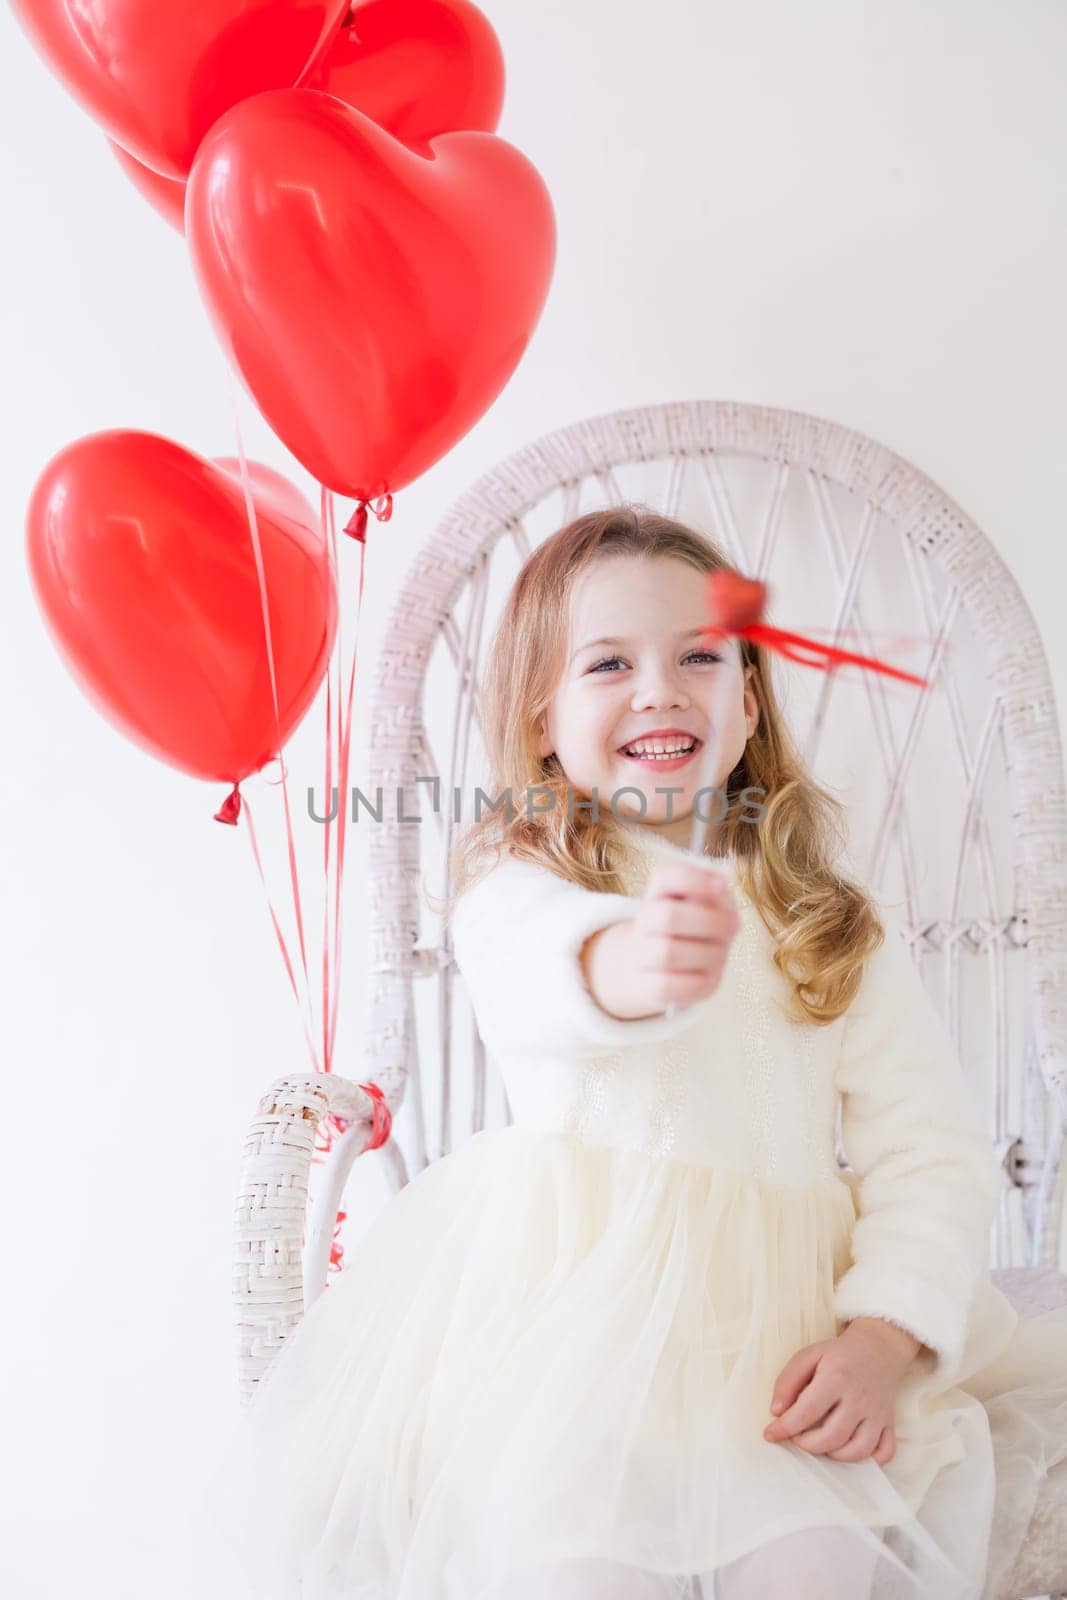 Little girl with red balloons for the holiday